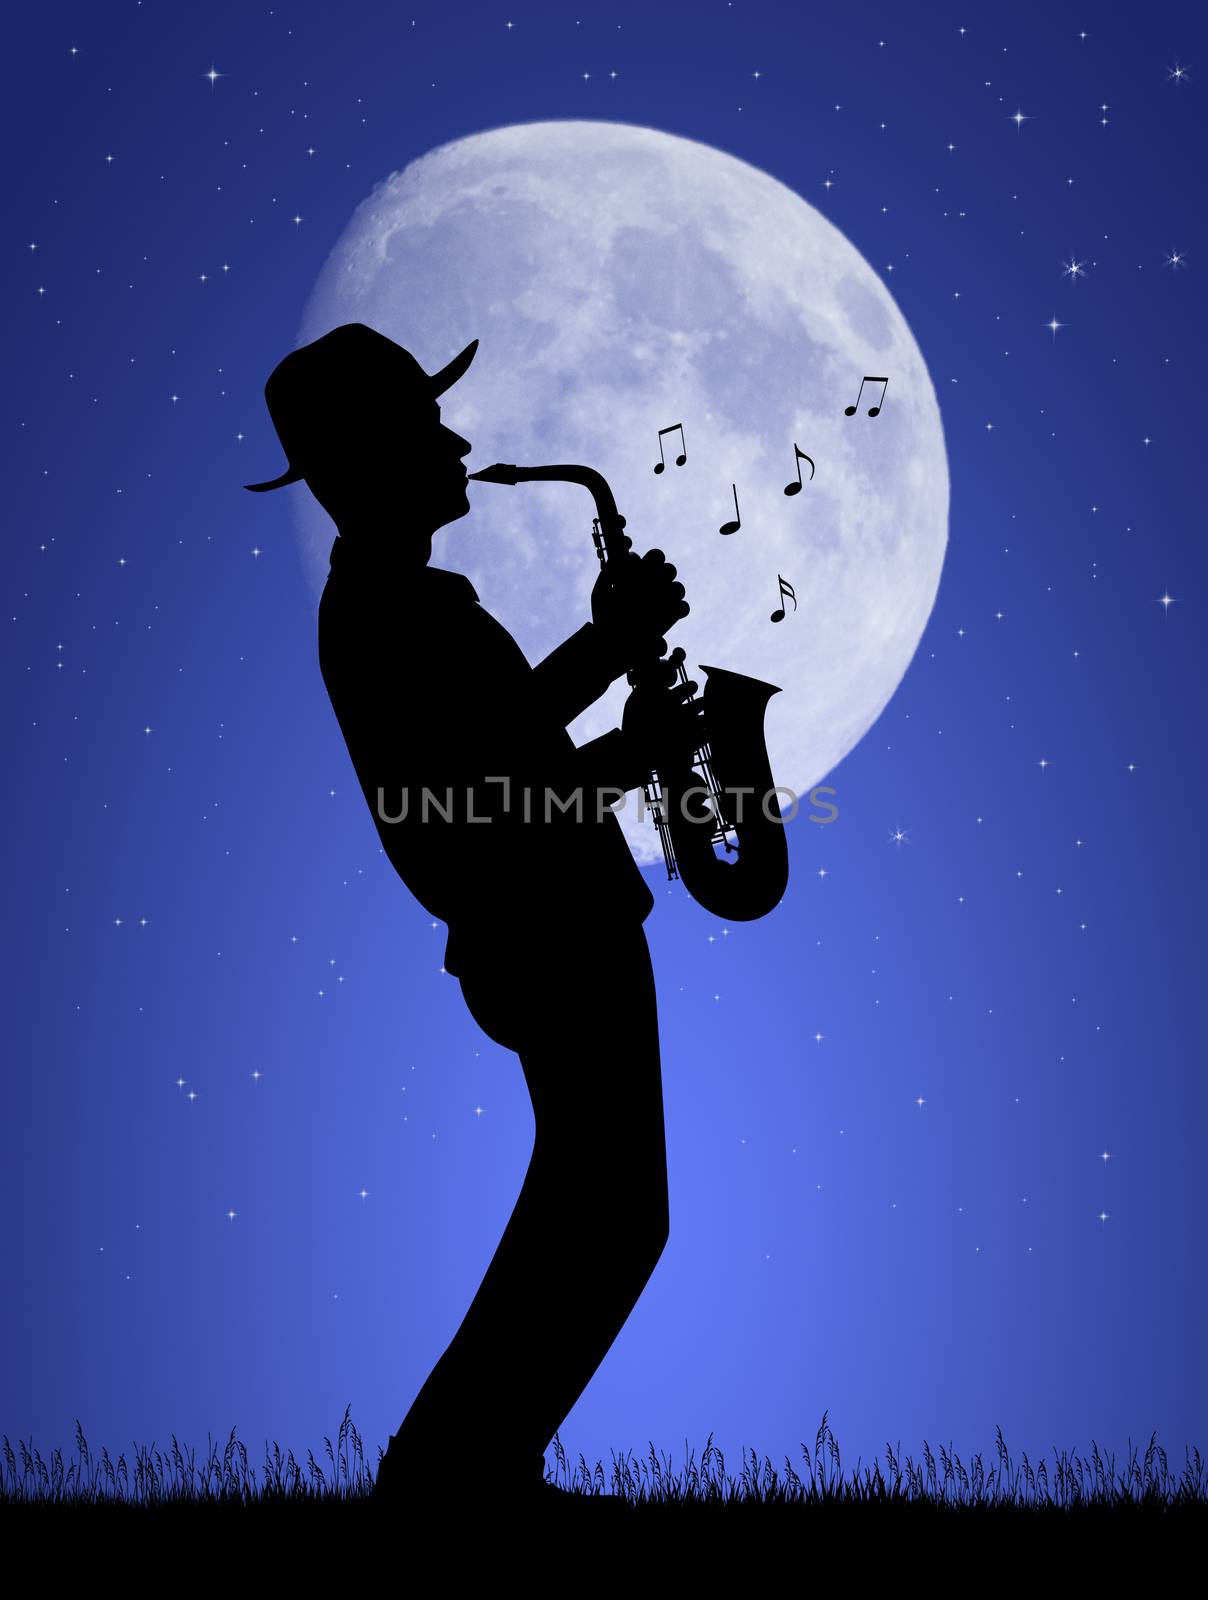 man plays the saxophone in the moonlight by adrenalina